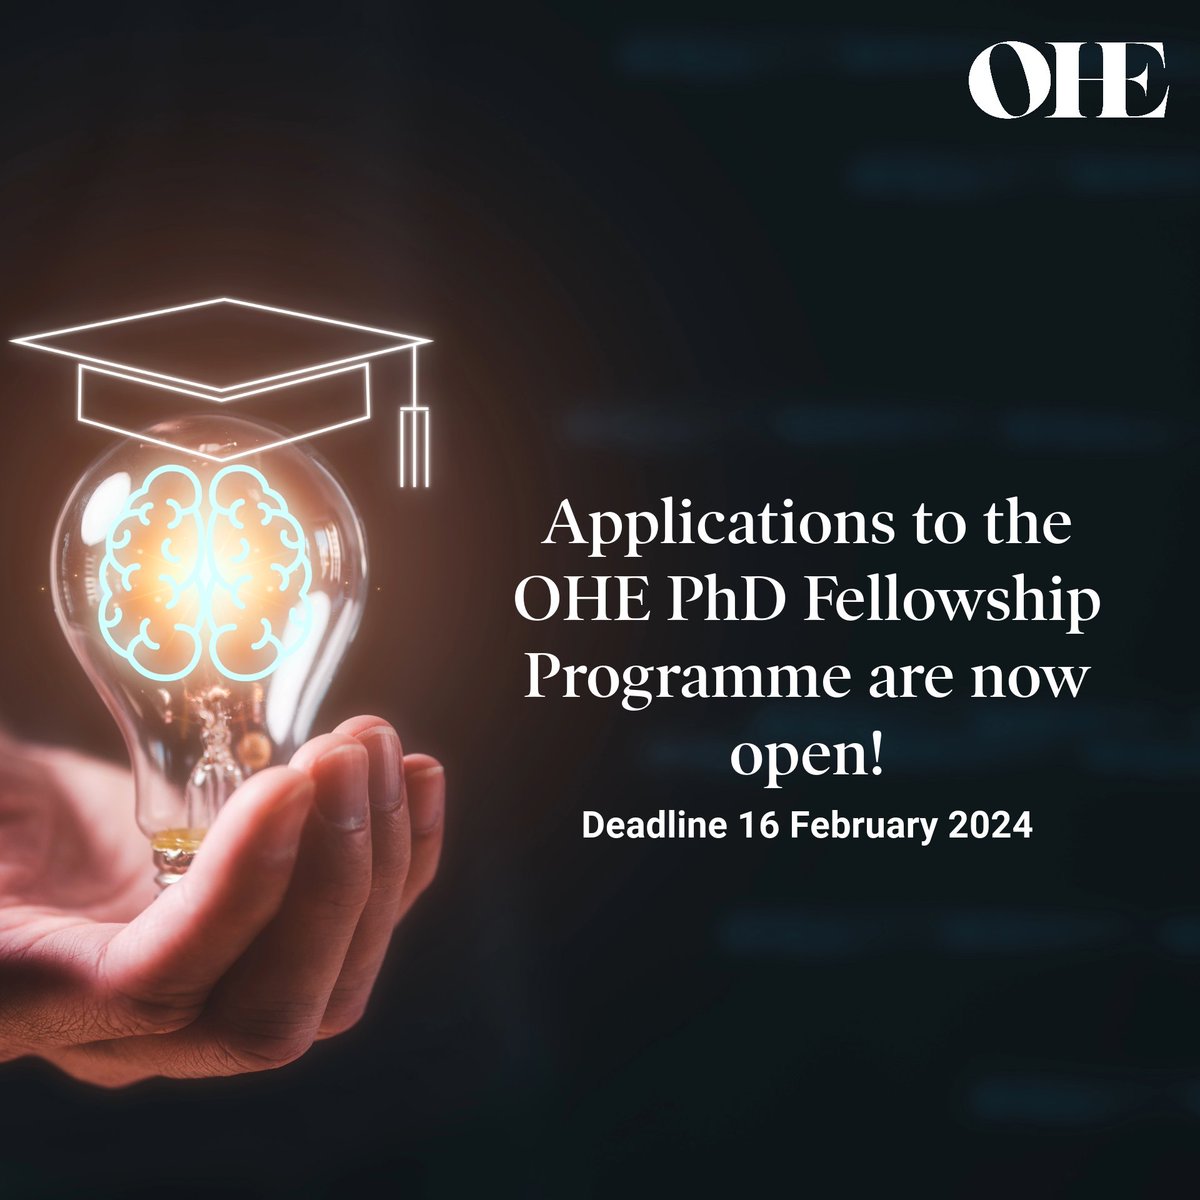 Do you have a PhD in Health Economics on your list of goals? Apply now for OHE's PhD Fellowship Programme at LSE. We offer an annual stipend of £20,622, work experience, and collaboration with top health economists. The application deadline is 16 February 2024!